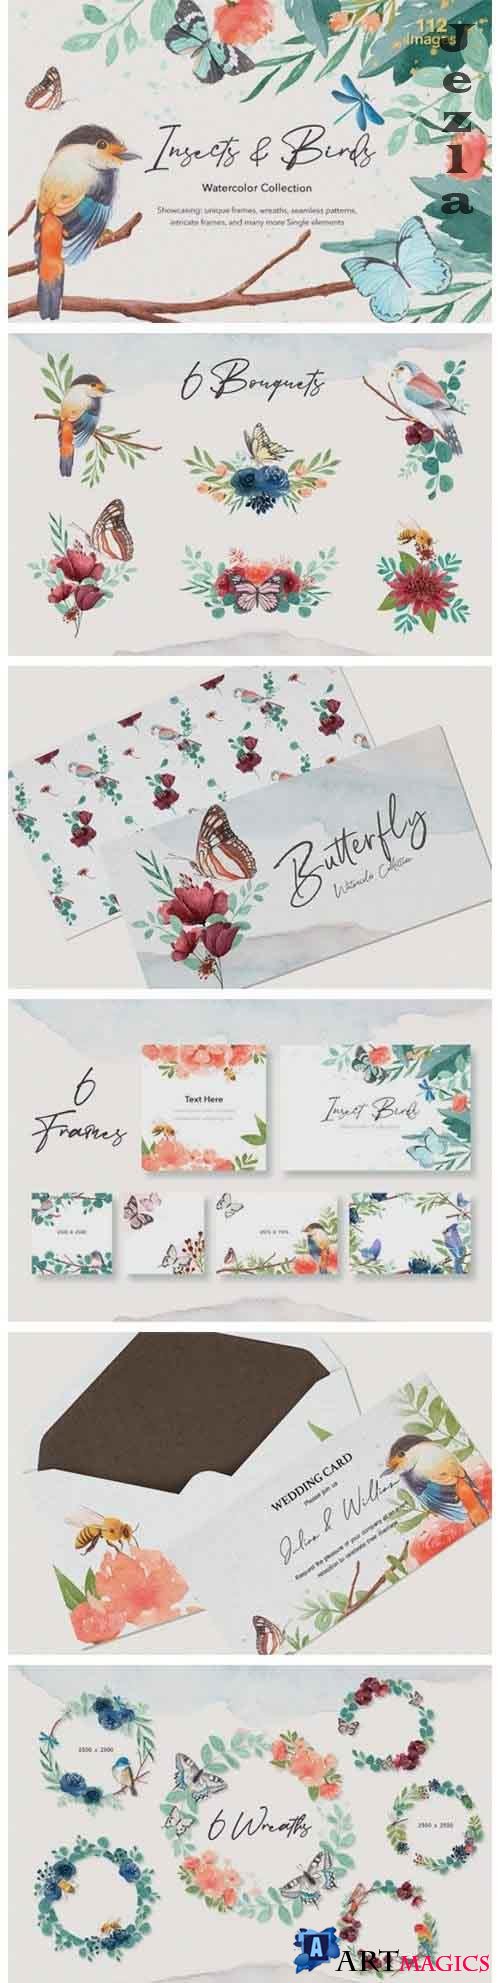 Insects & Birds Watercolor Set - 5504803